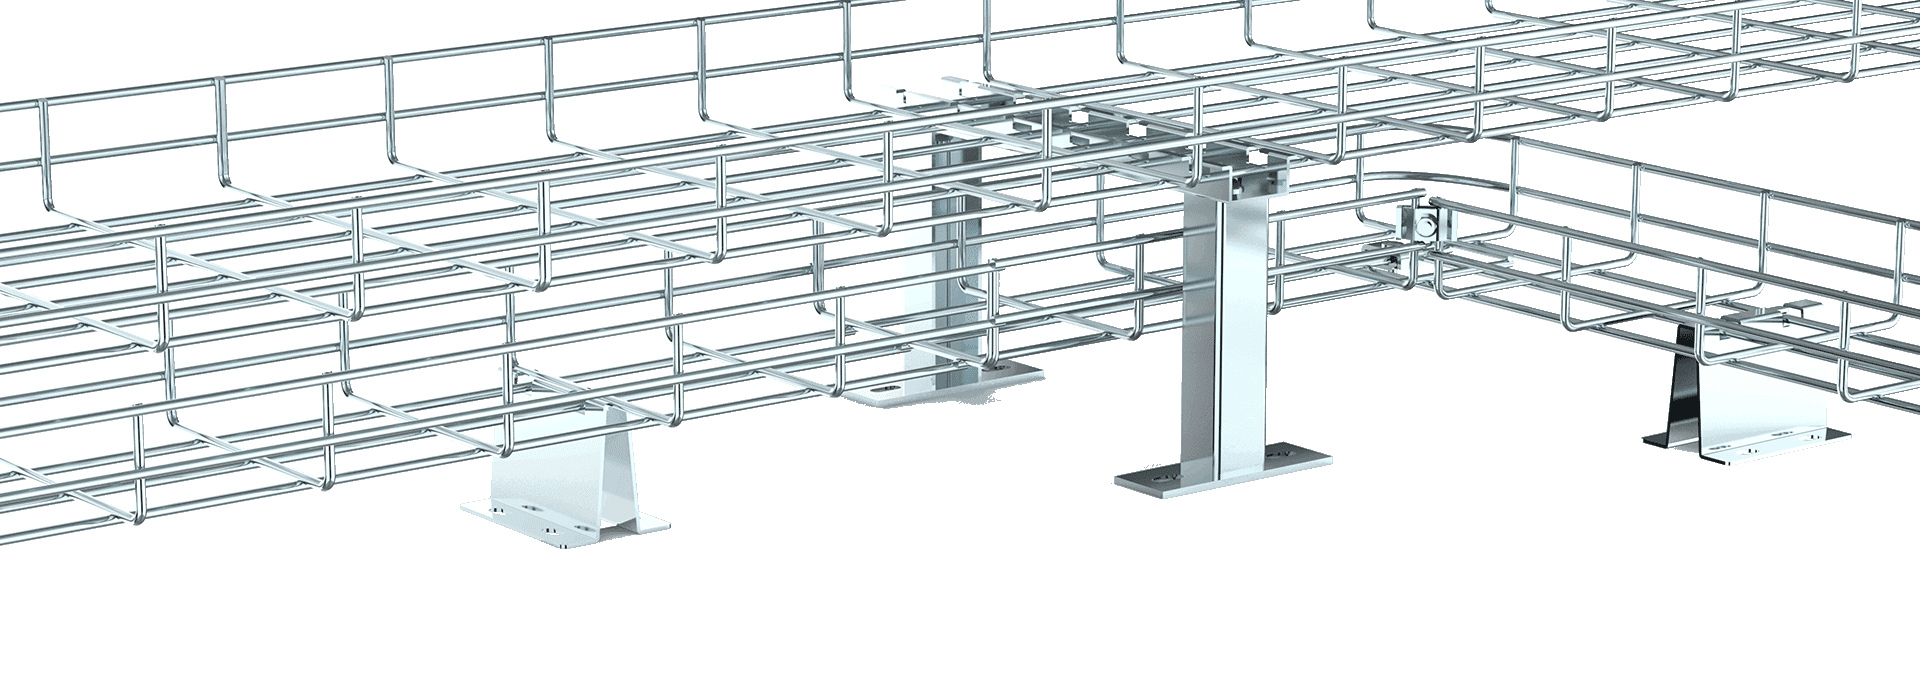 What are the installation methods of grid cable tray against the wall?